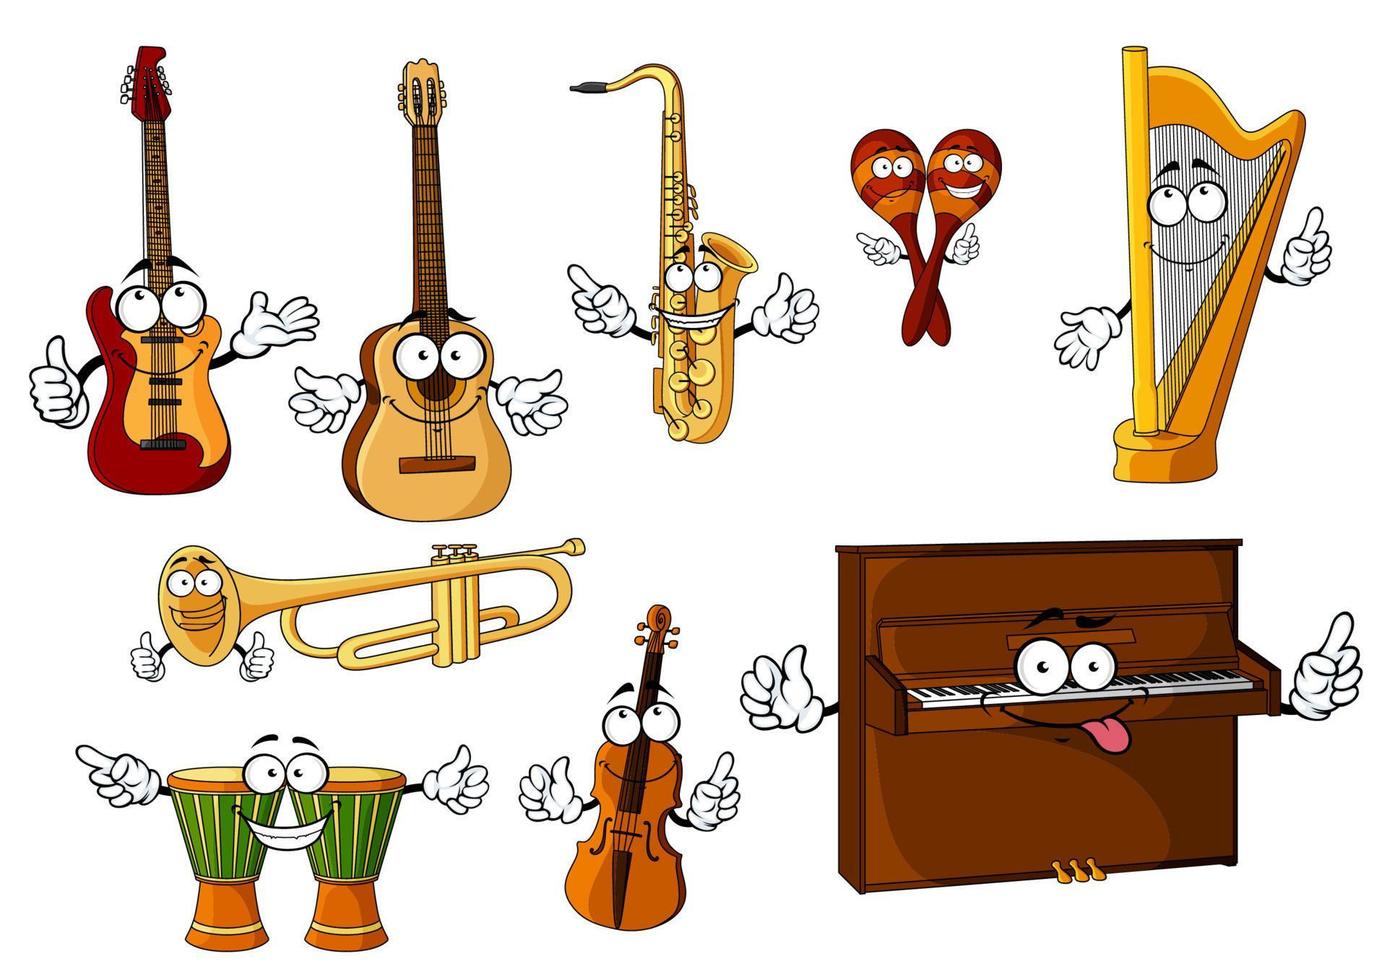 Classic cartoon musical instruments characters vector